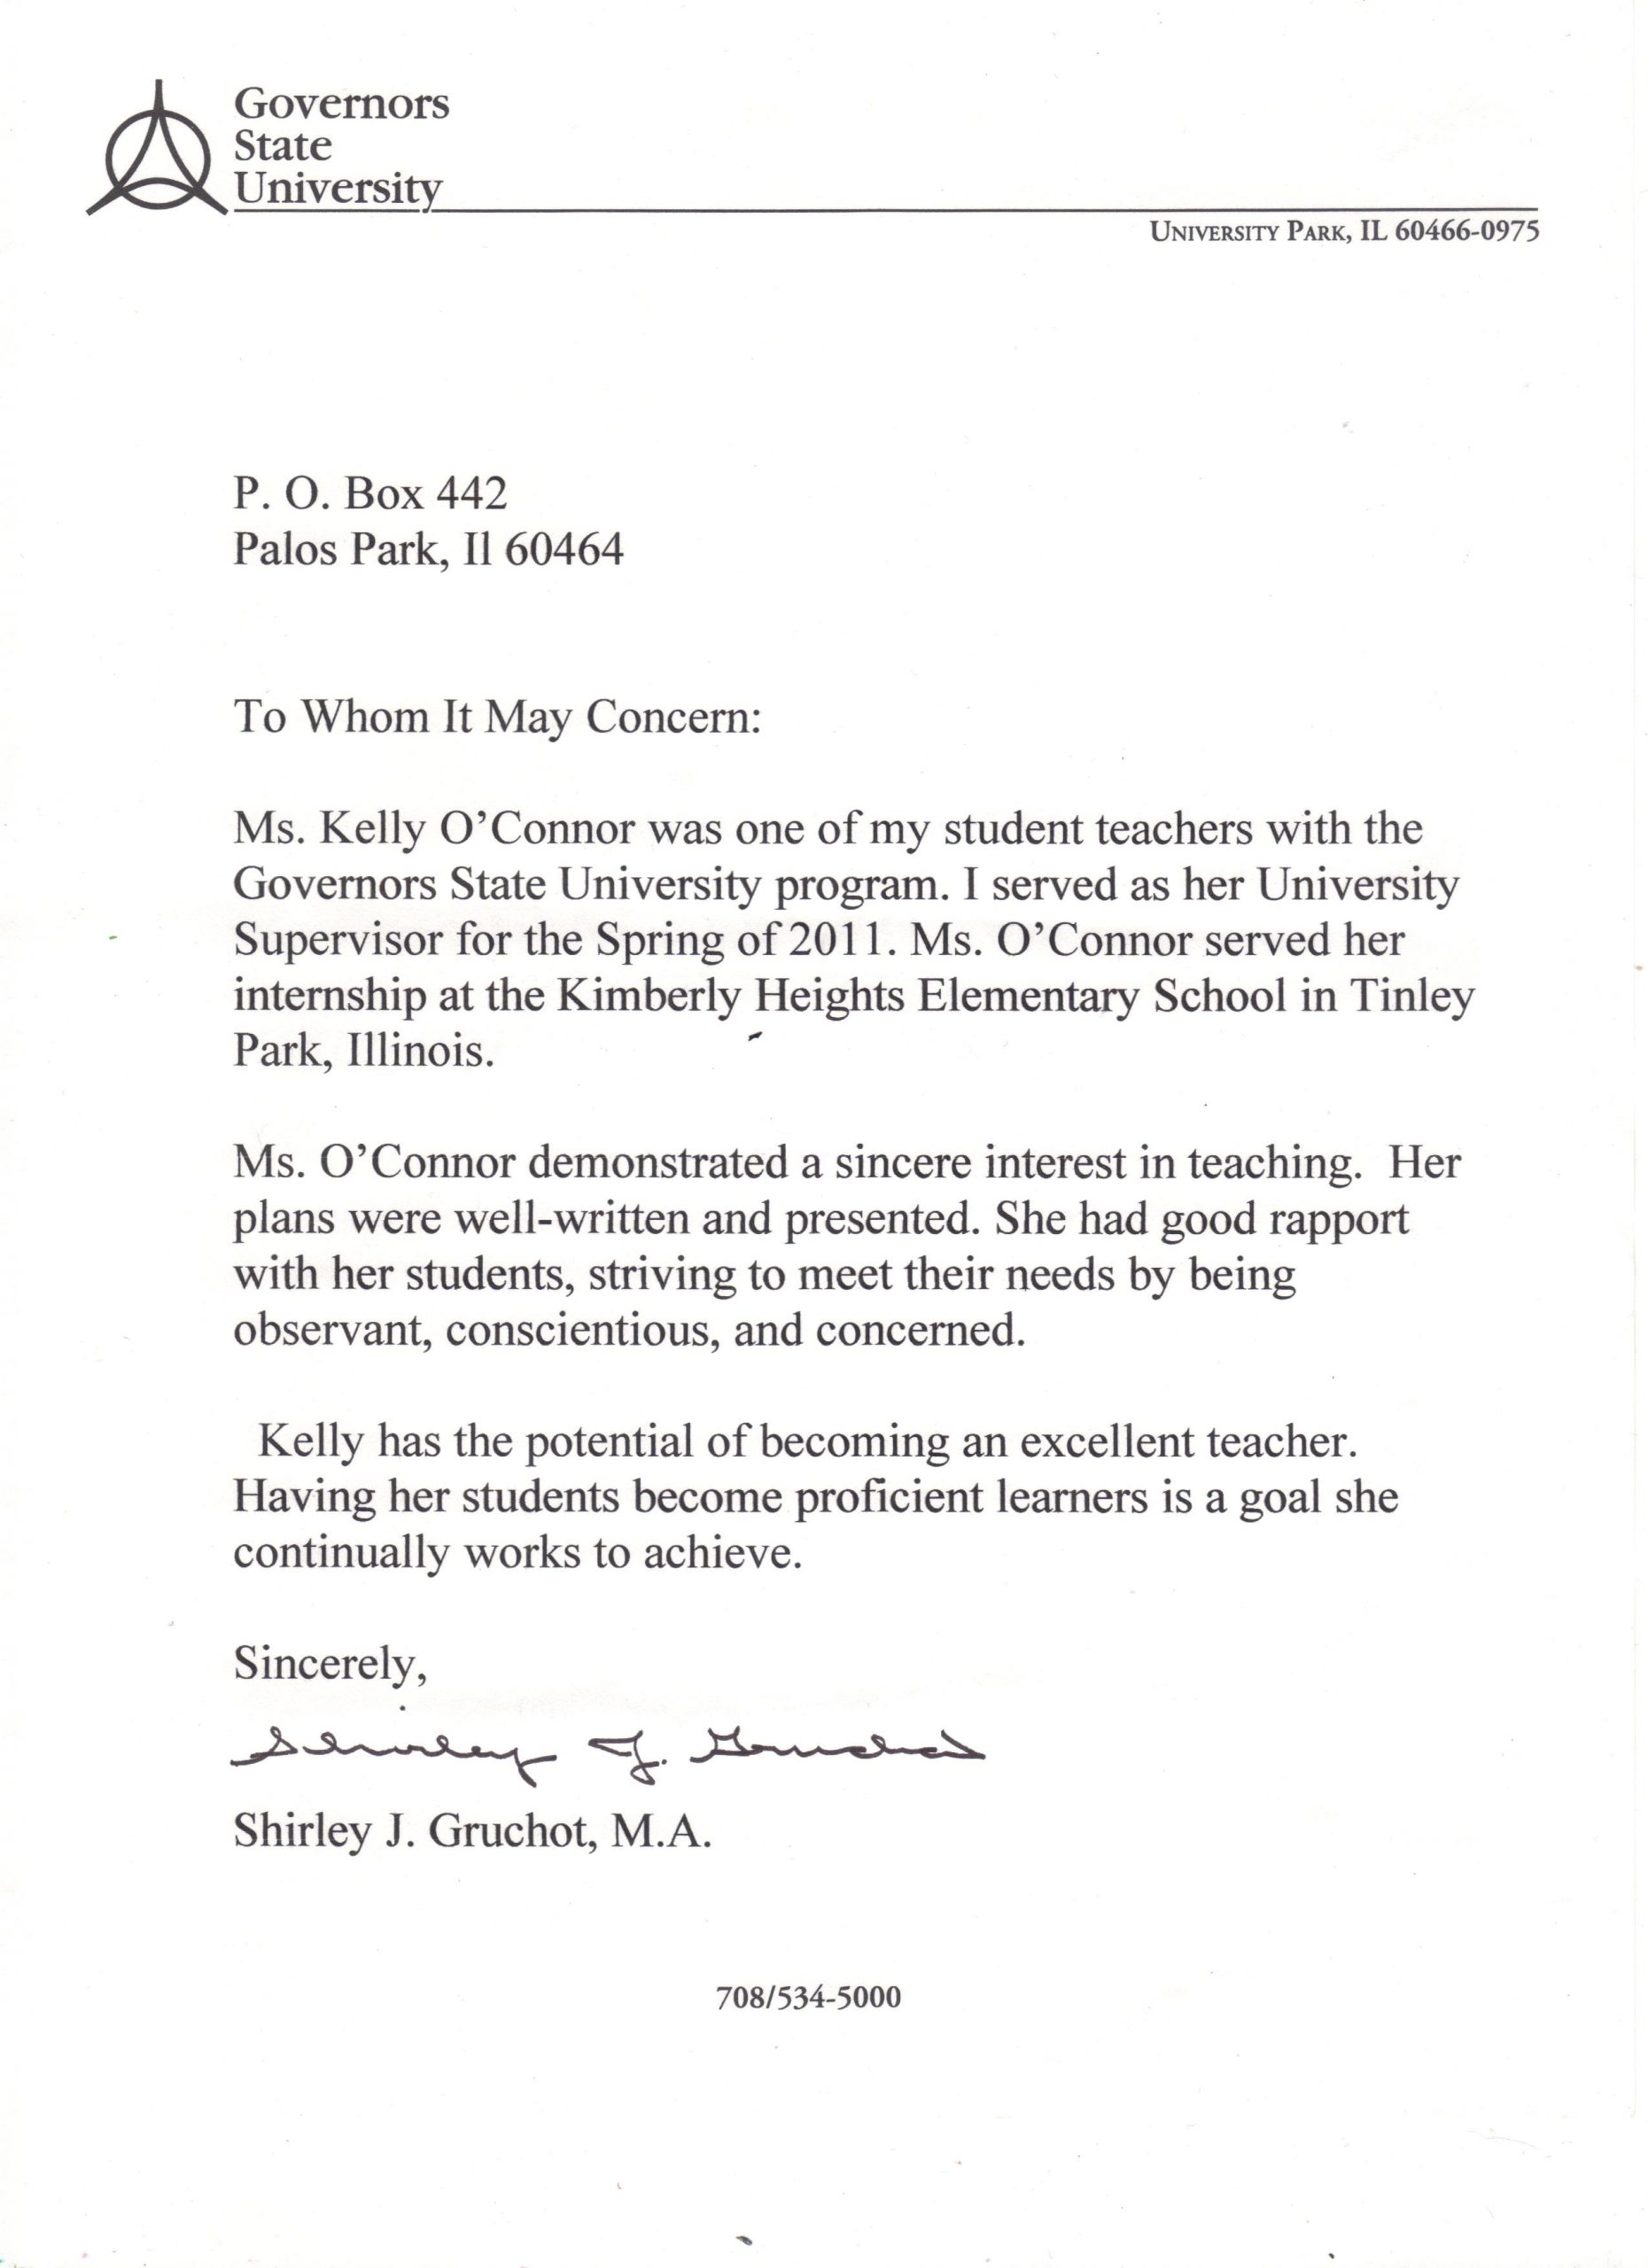 Reference Letters Kelly Oconnor Banaszaks Teaching in dimensions 2550 X 3510